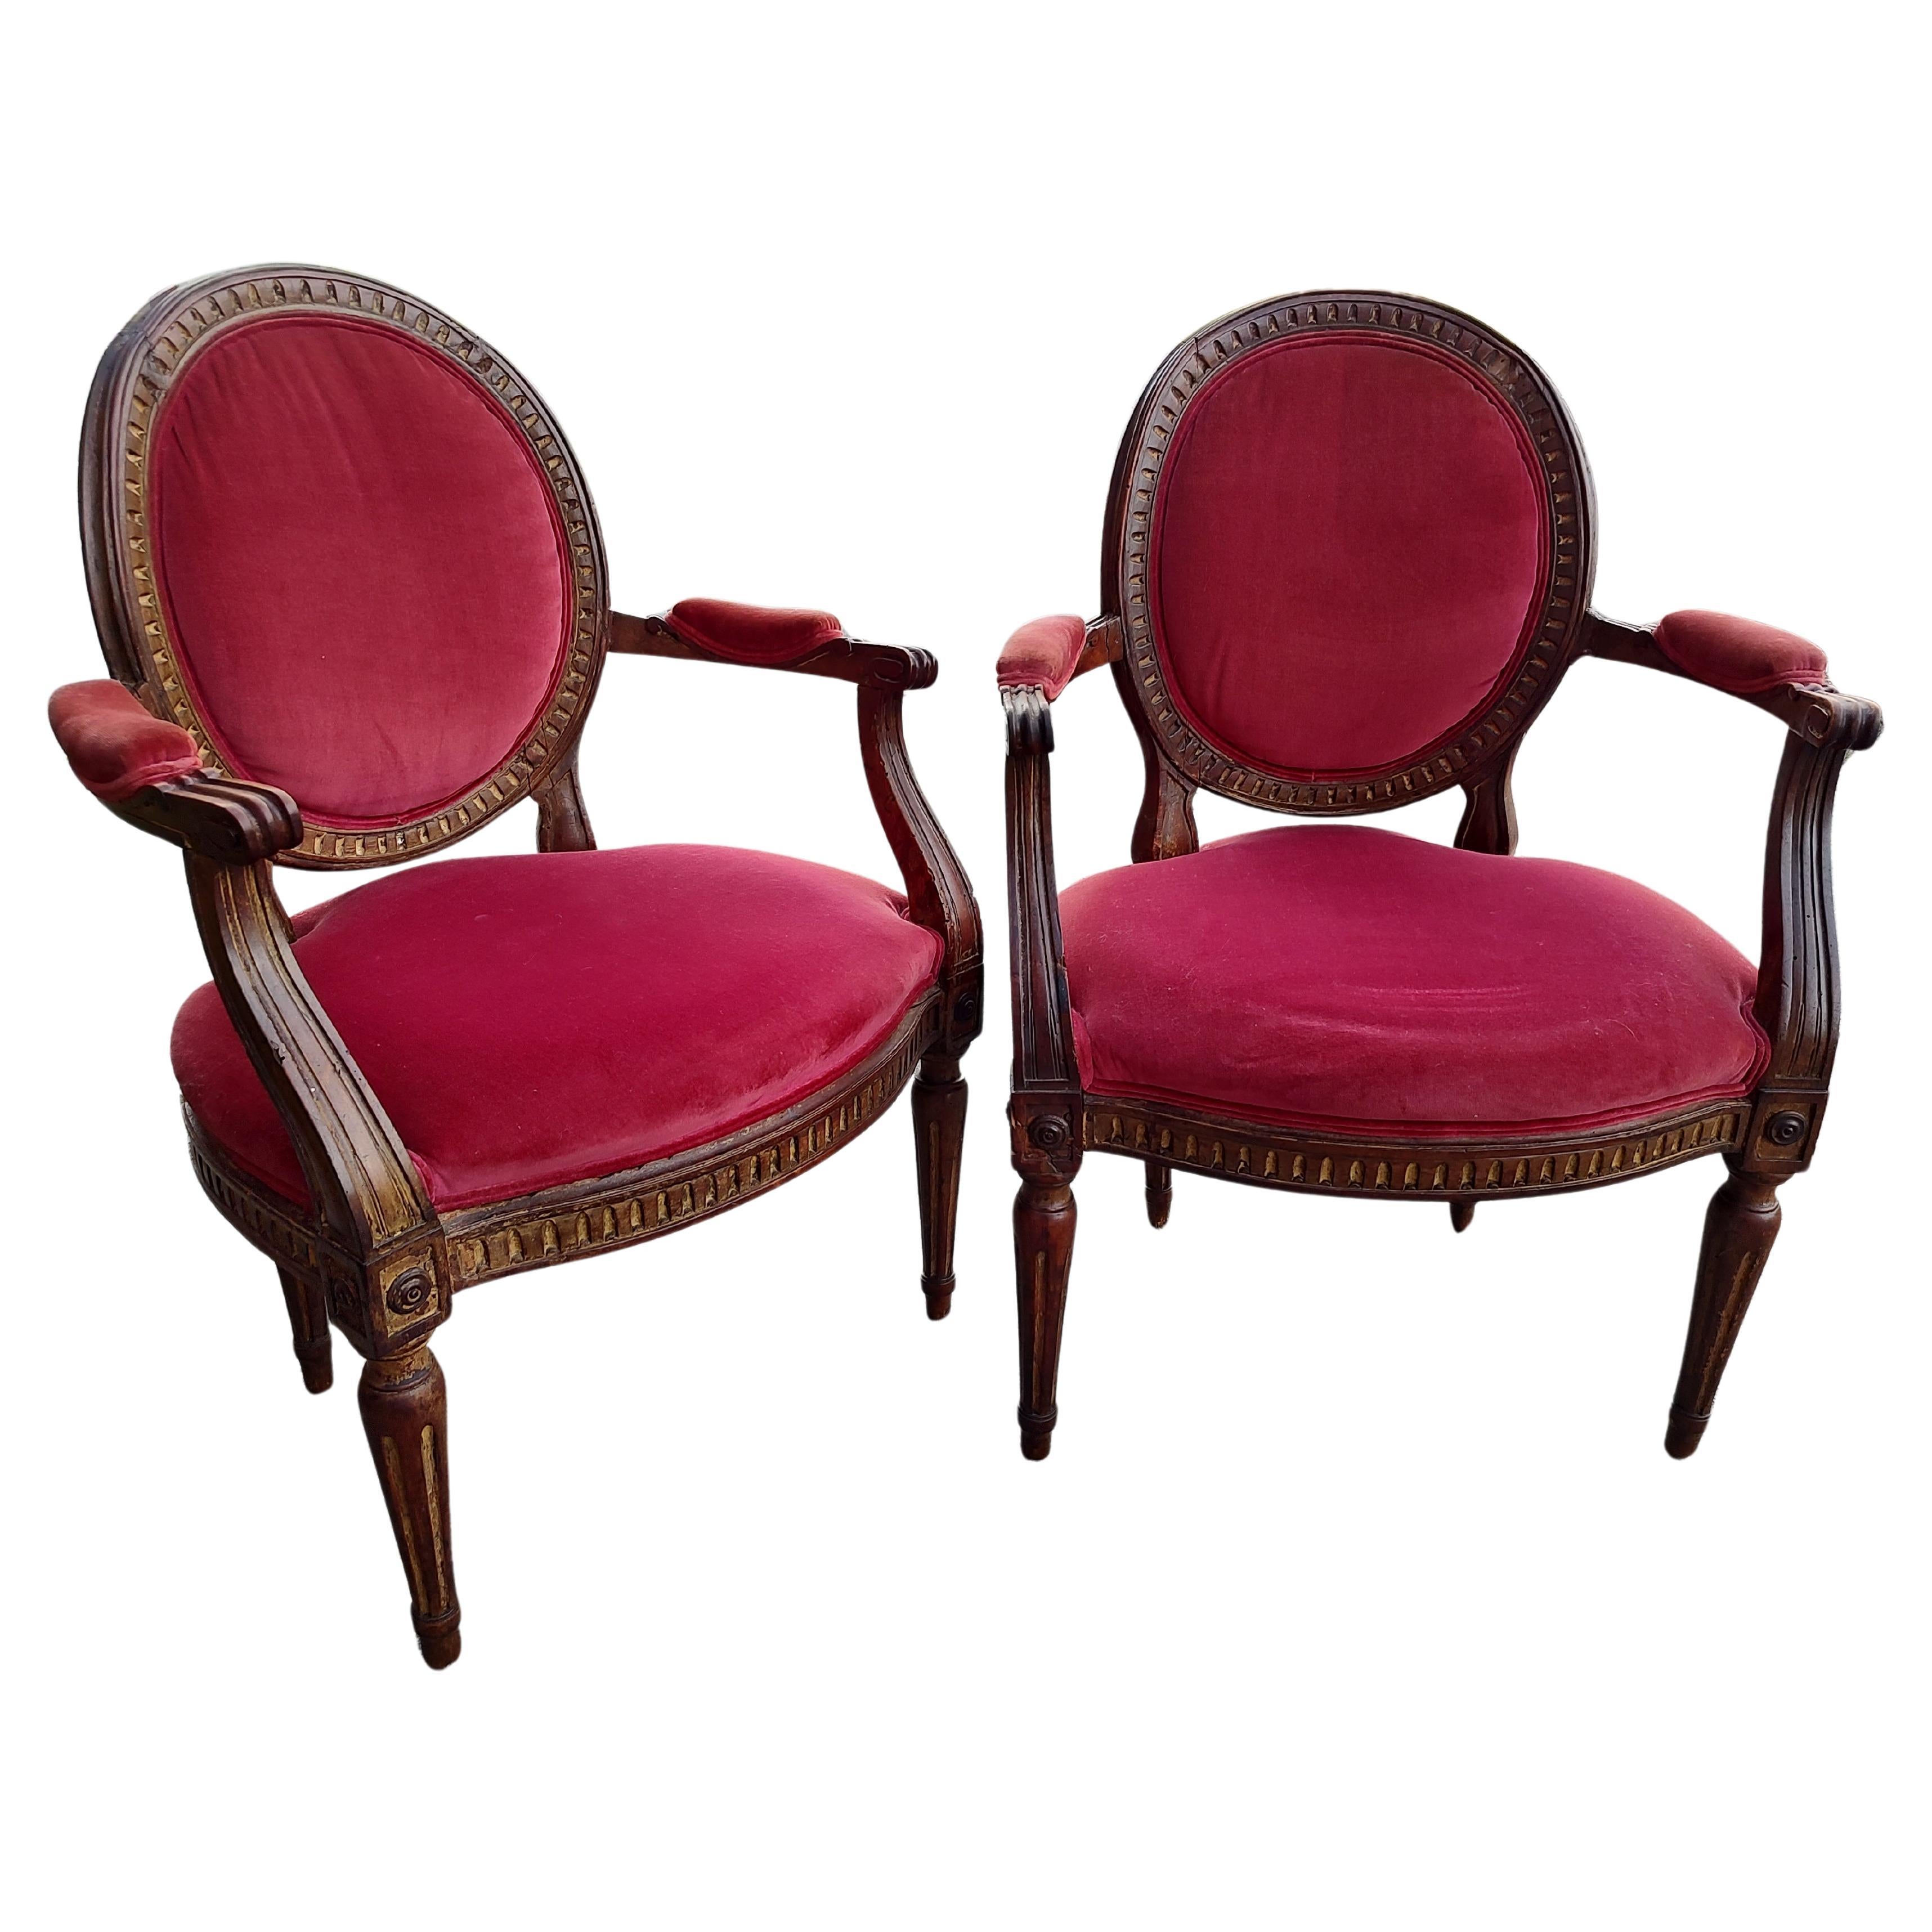 Hand-Carved Pair of 19th Century French Fauteuils Armchairs with Carved Gilt Wood